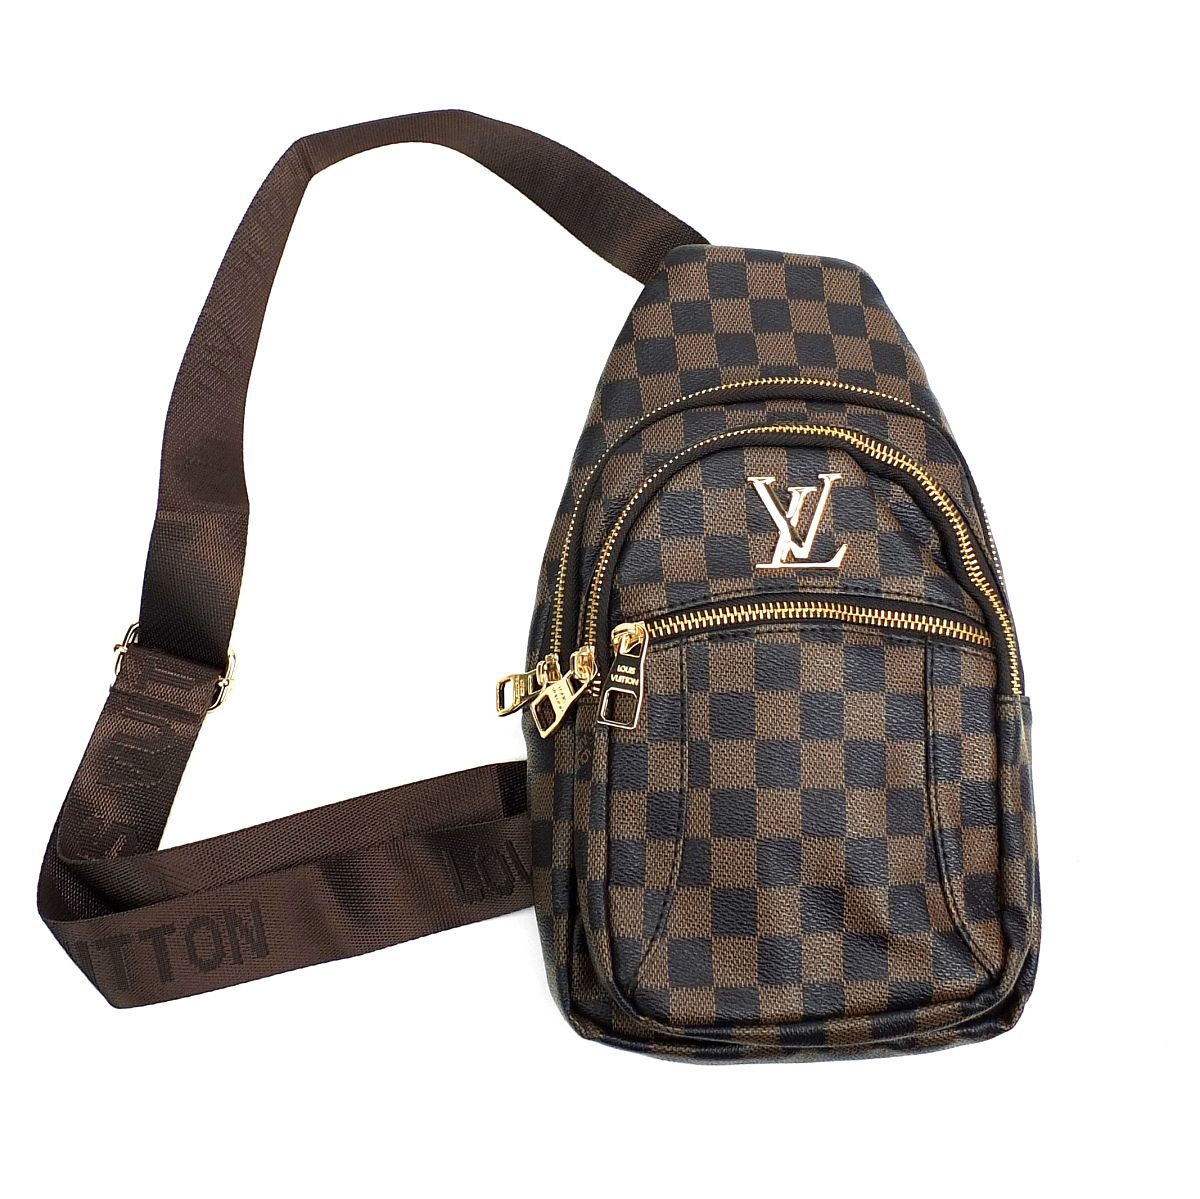 Replica Louis Vuitton Sling Bag for sale at auction on 30th January